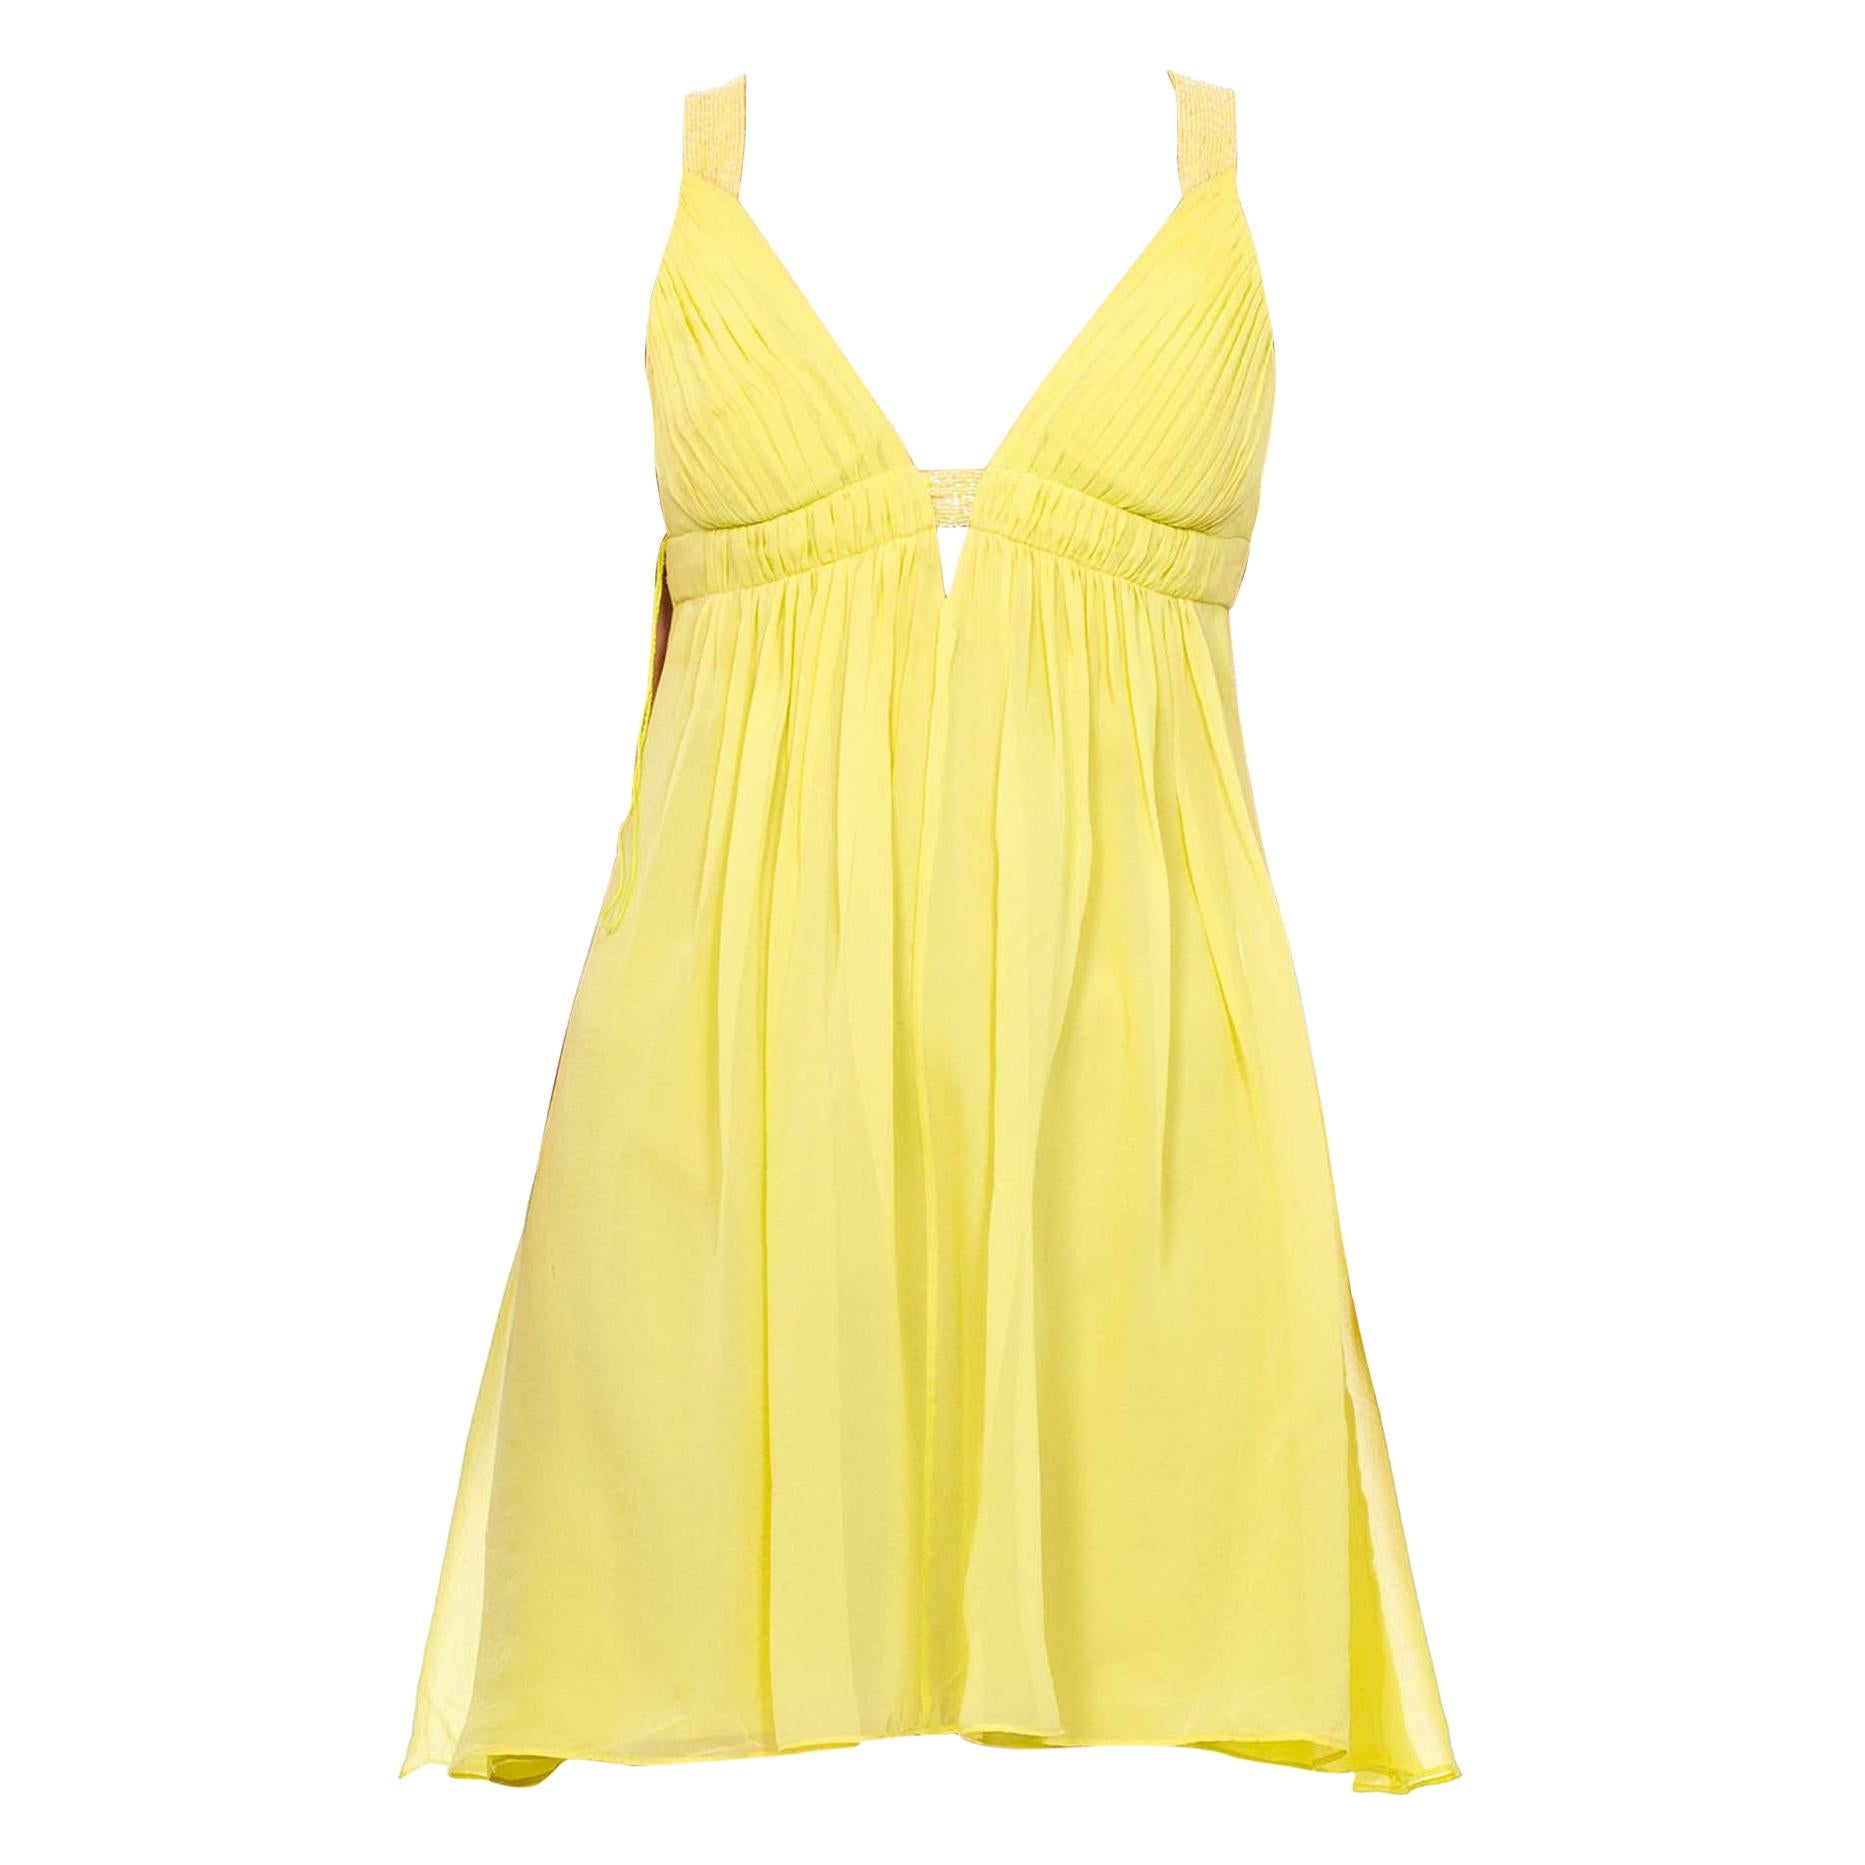 2000S ALEXANDER MCQUEEN Style Lime Green Silk Chiffon Backless Mini Godess Cock